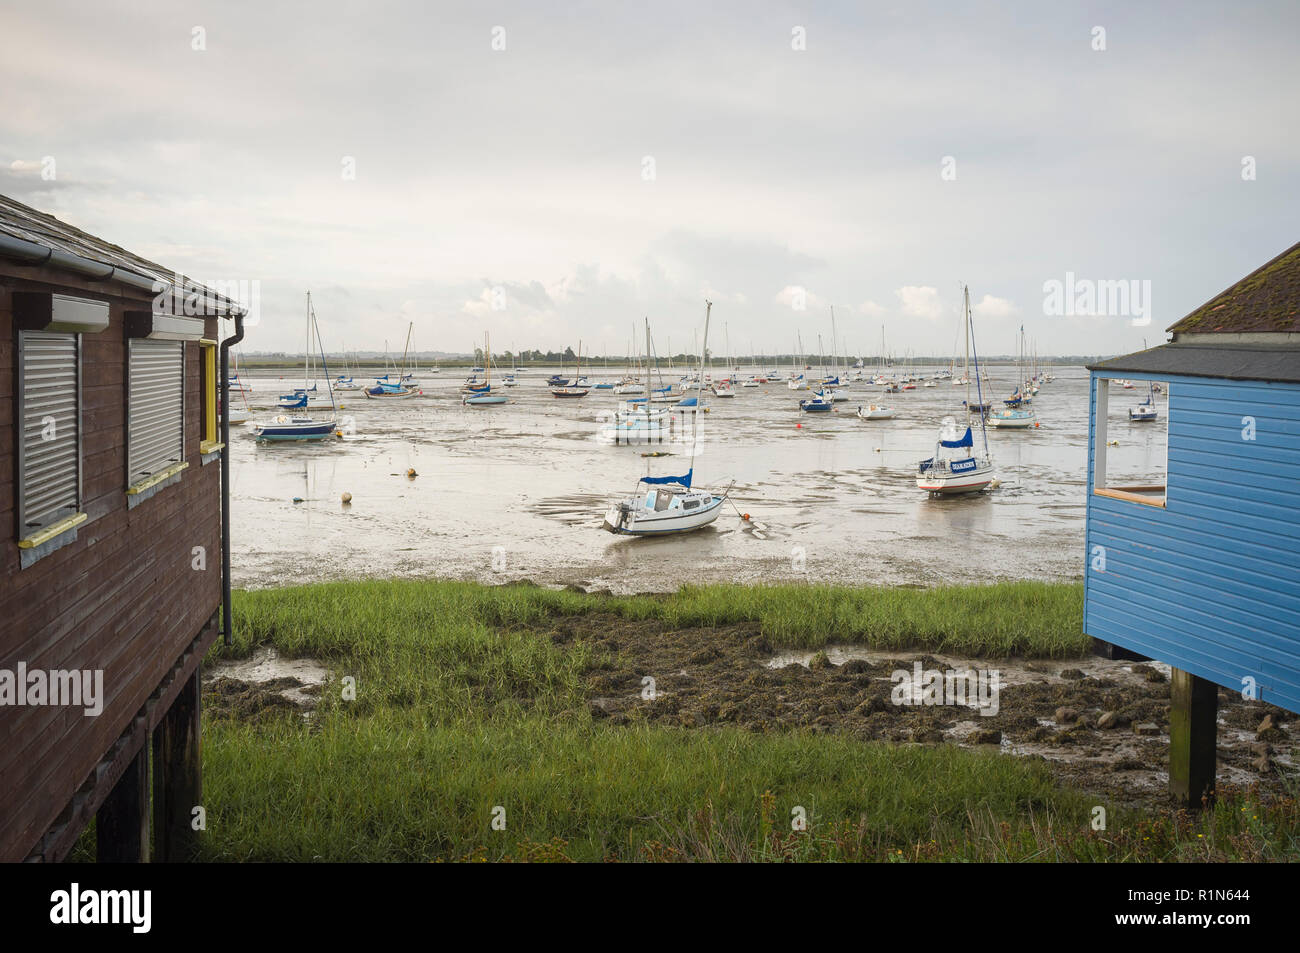 View to Osea Island and the estuary of the River Blackwater, Maldon, Essex with yachts at low tide Stock Photo